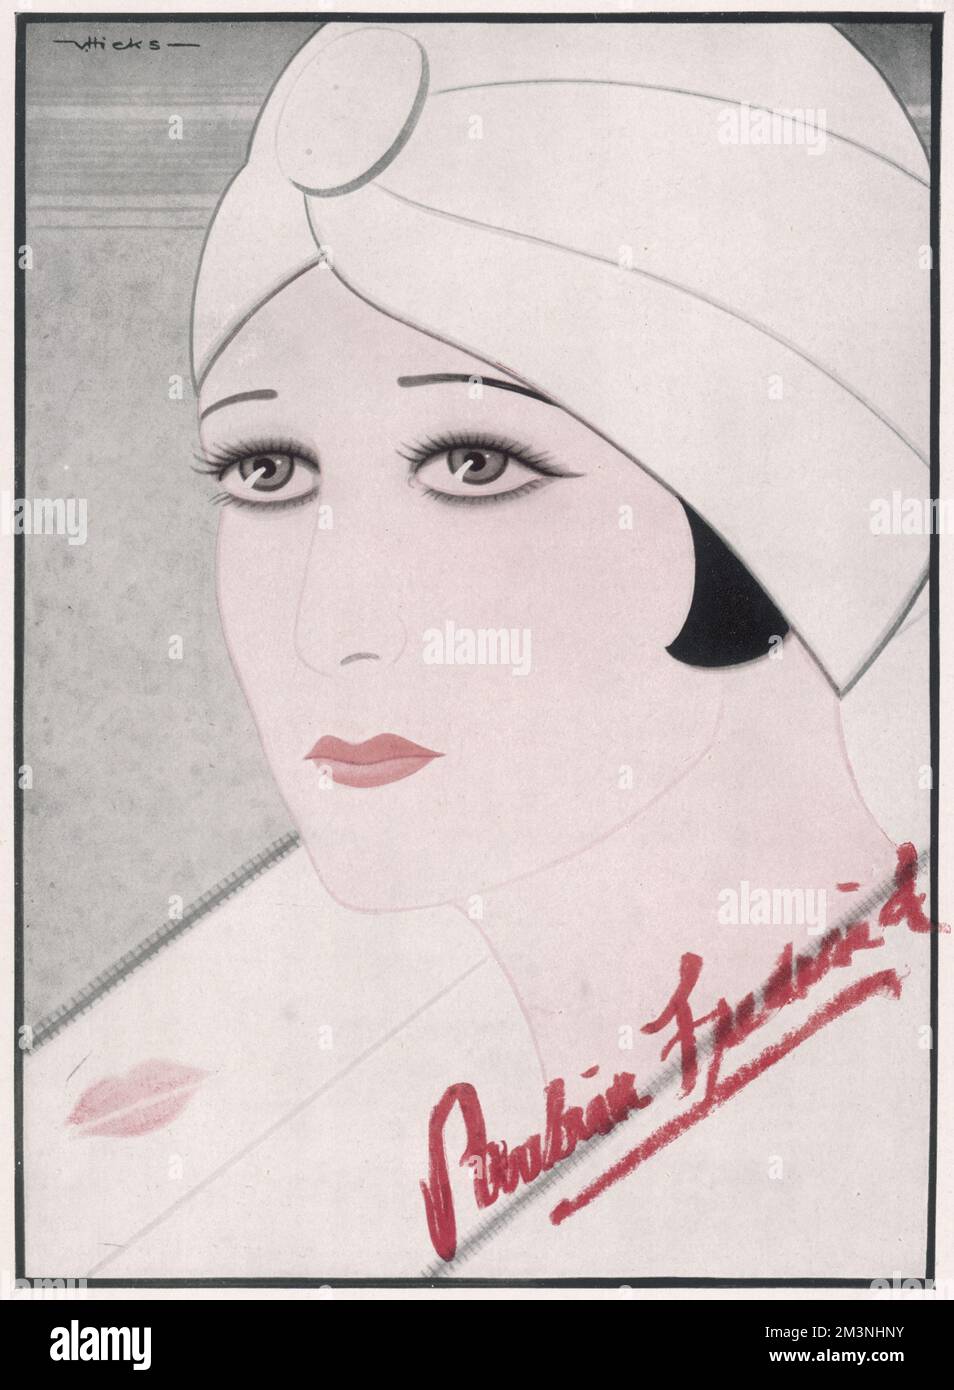 PAULINE FREDERICK (1883 - 1938)  American actress -- she has signed the portrait in red lipstick on the right, and added an impression of her own lips in the lower left corner.  At this time she was appearing at the Lyceum Theatre in London in the play Madame X by Alexandre Bisson (she had also appeared in a film version in 1920).      Date: 1927 Stock Photo